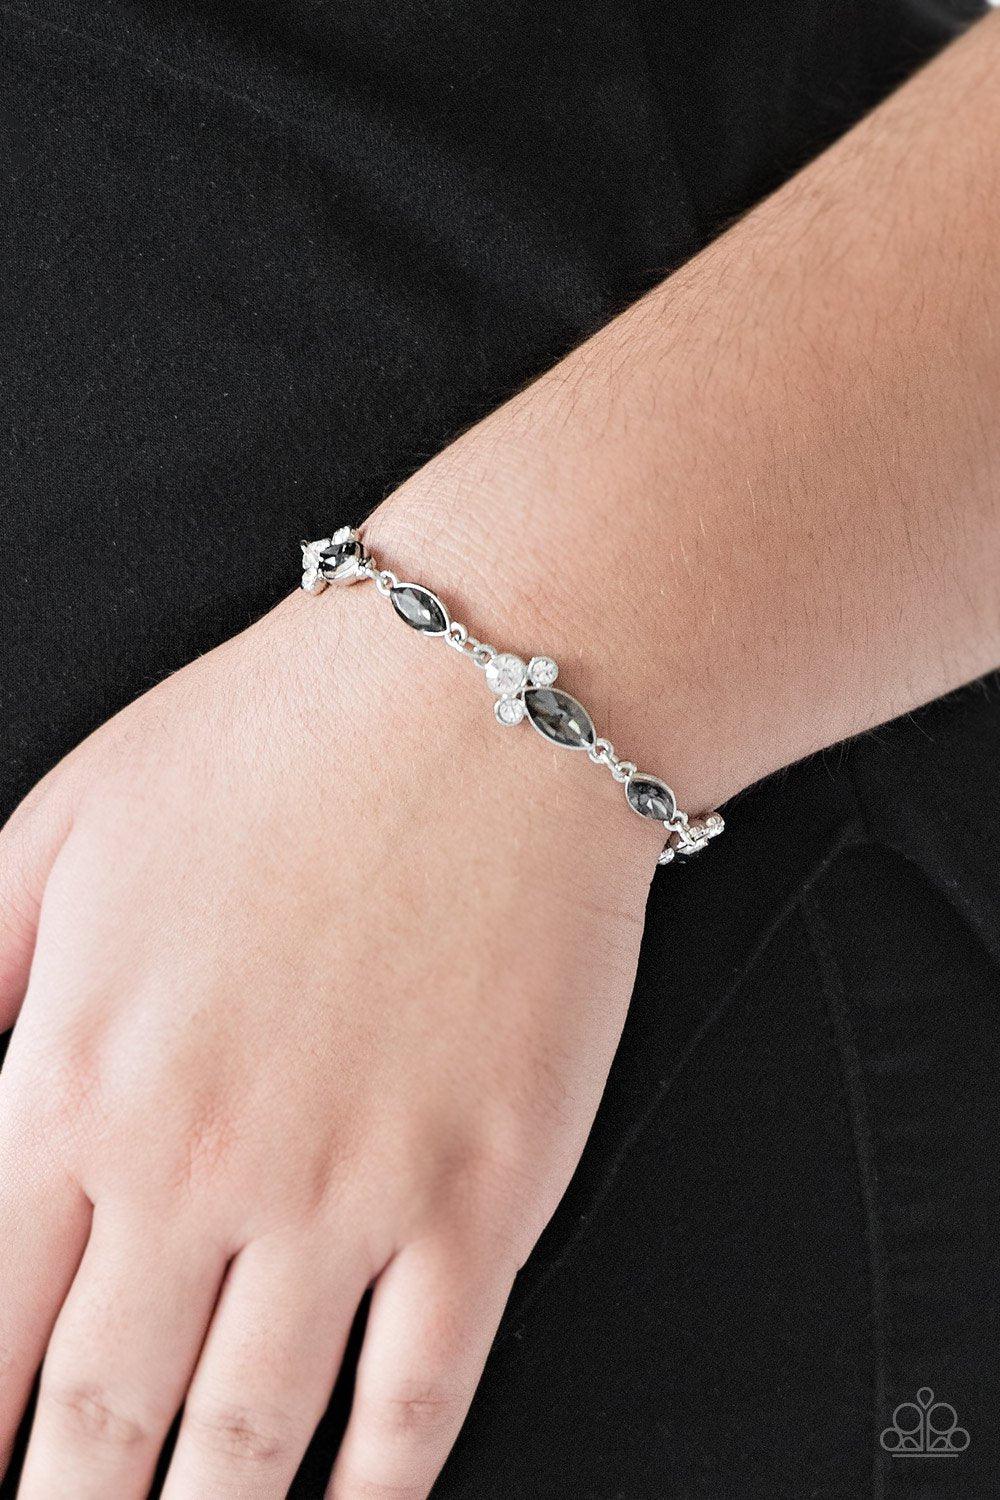 At Any Cost Silver and White Gem Bracelet - Paparazzi Accessories-CarasShop.com - $5 Jewelry by Cara Jewels